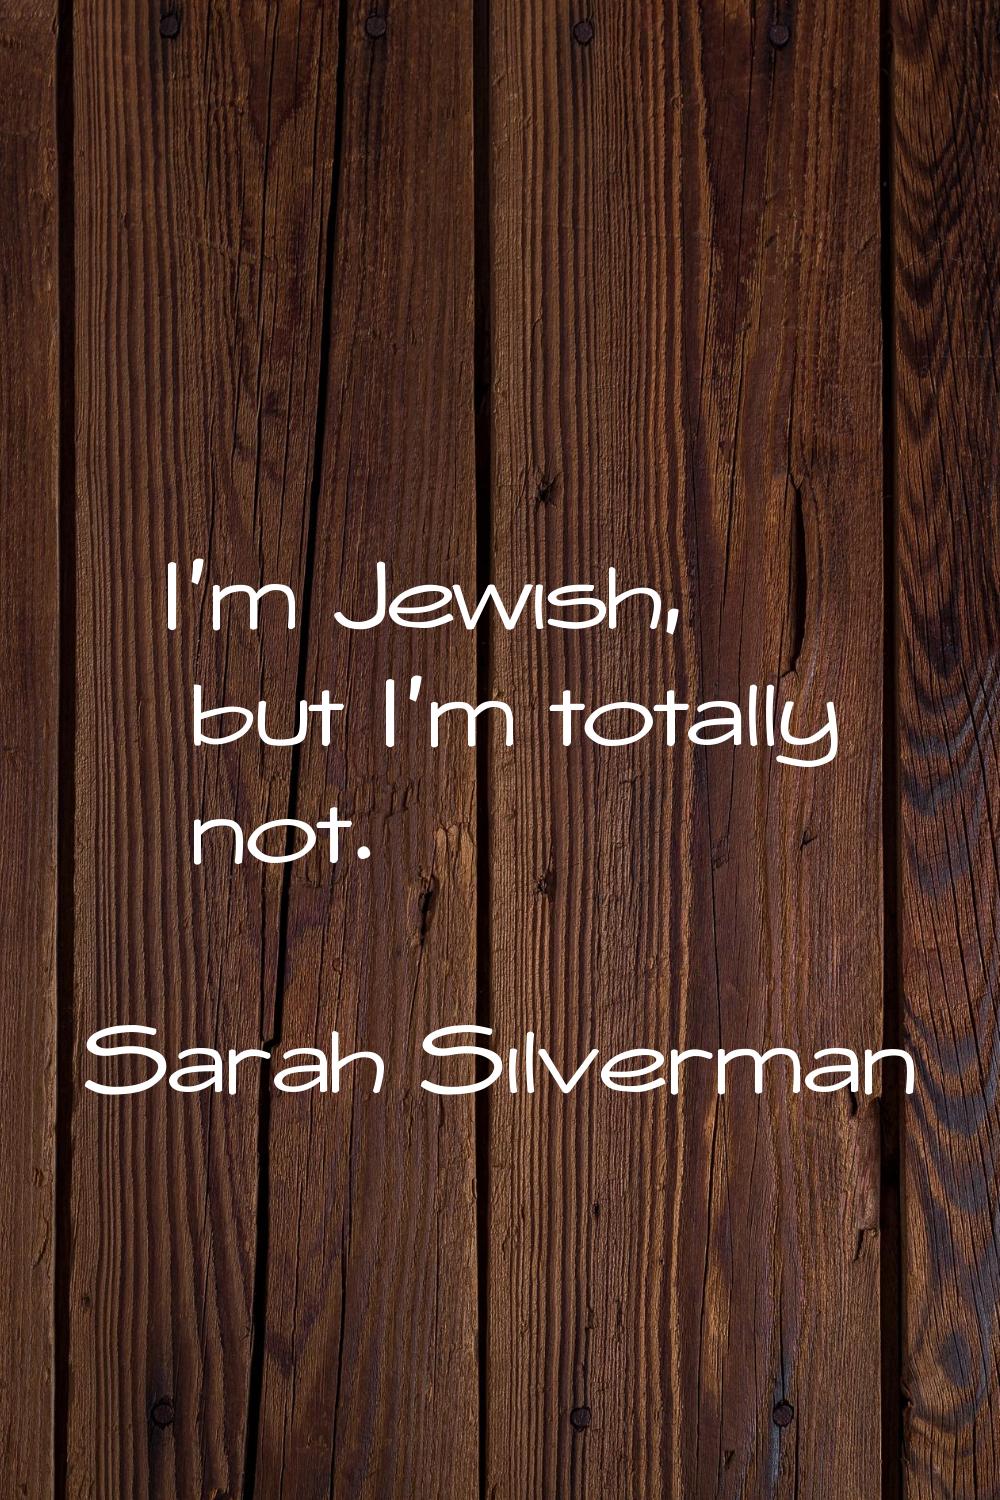 I'm Jewish, but I'm totally not.